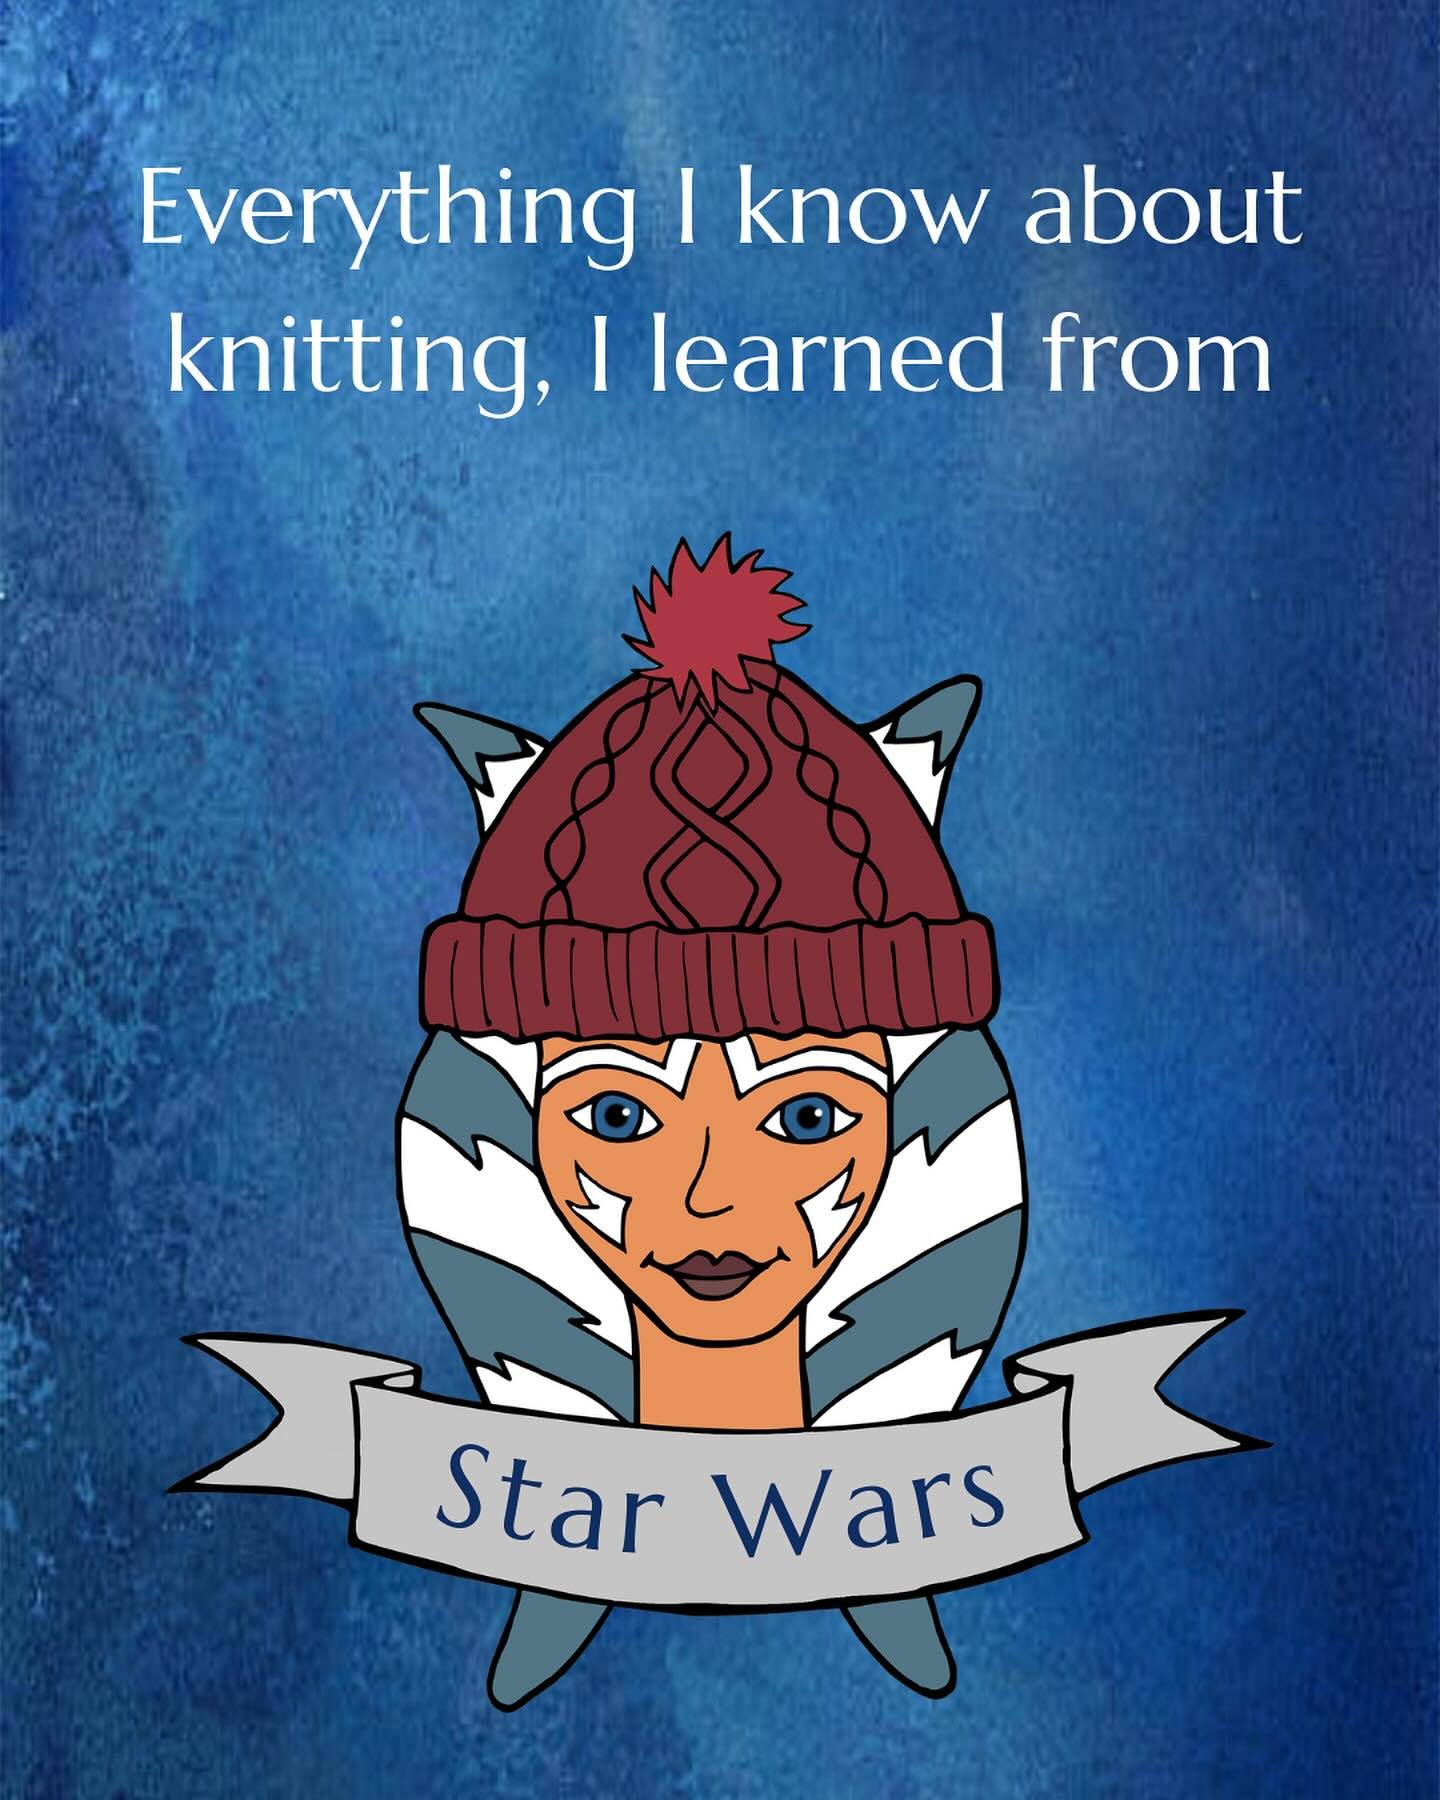 Everything I know about knitting I learned from Star Wars!

Okay, maybe not everything, but at least a few things worth repeating on May 4th. 

⭐️ &ldquo;I don&rsquo;t know who you are or where you came from, but from now on you&rsquo;ll do as I tell